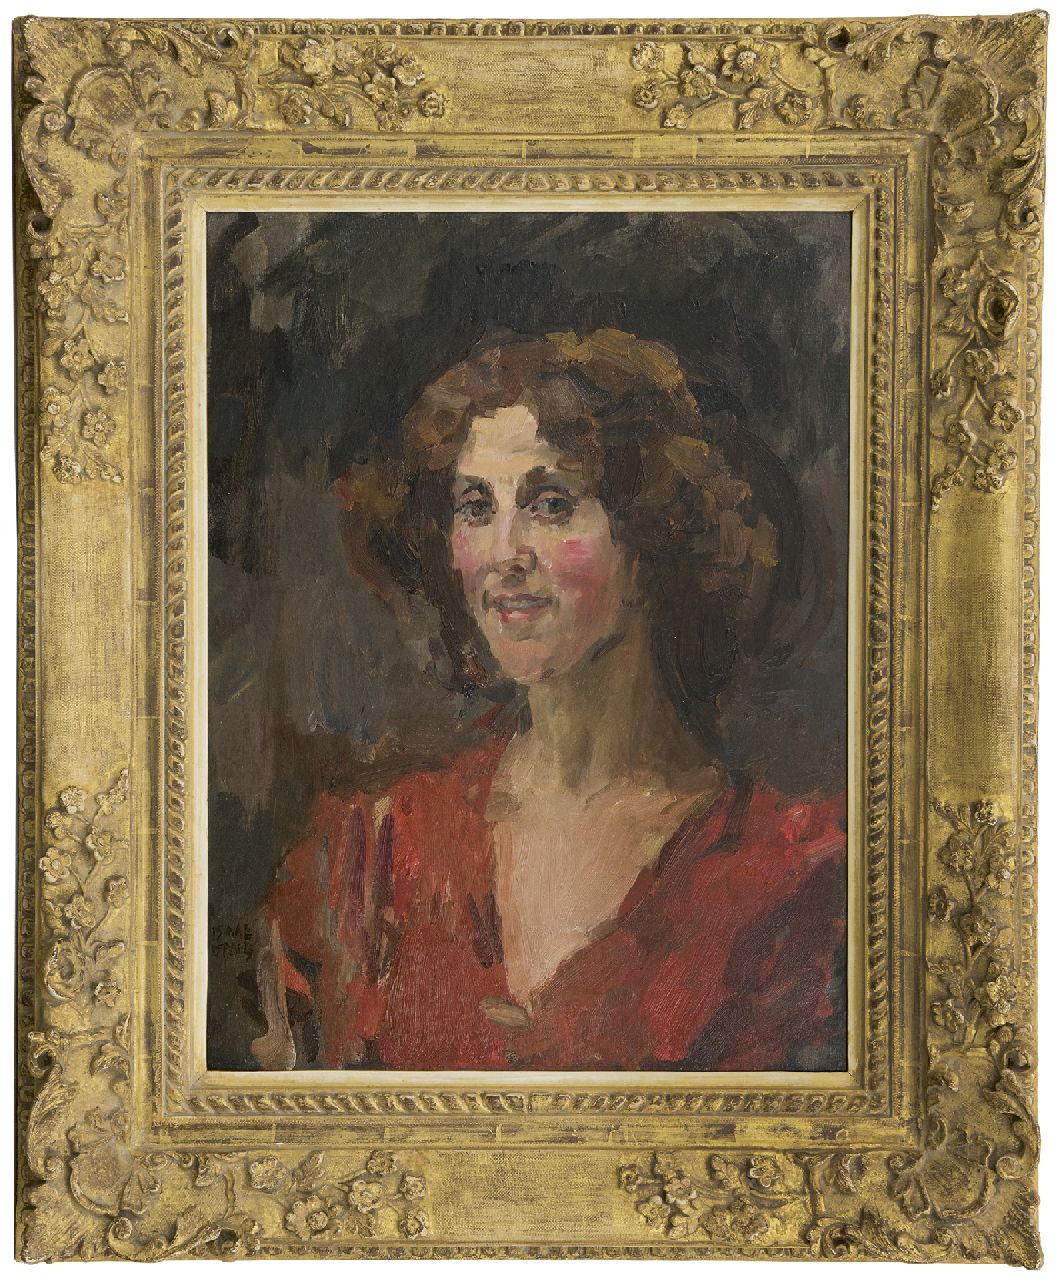 Israels I.L.  | 'Isaac' Lazarus Israels, Portrait of the artist's friend Sophie de Vries, oil on canvas laid down on board 60.3 x 45.6 cm, signed l.l.